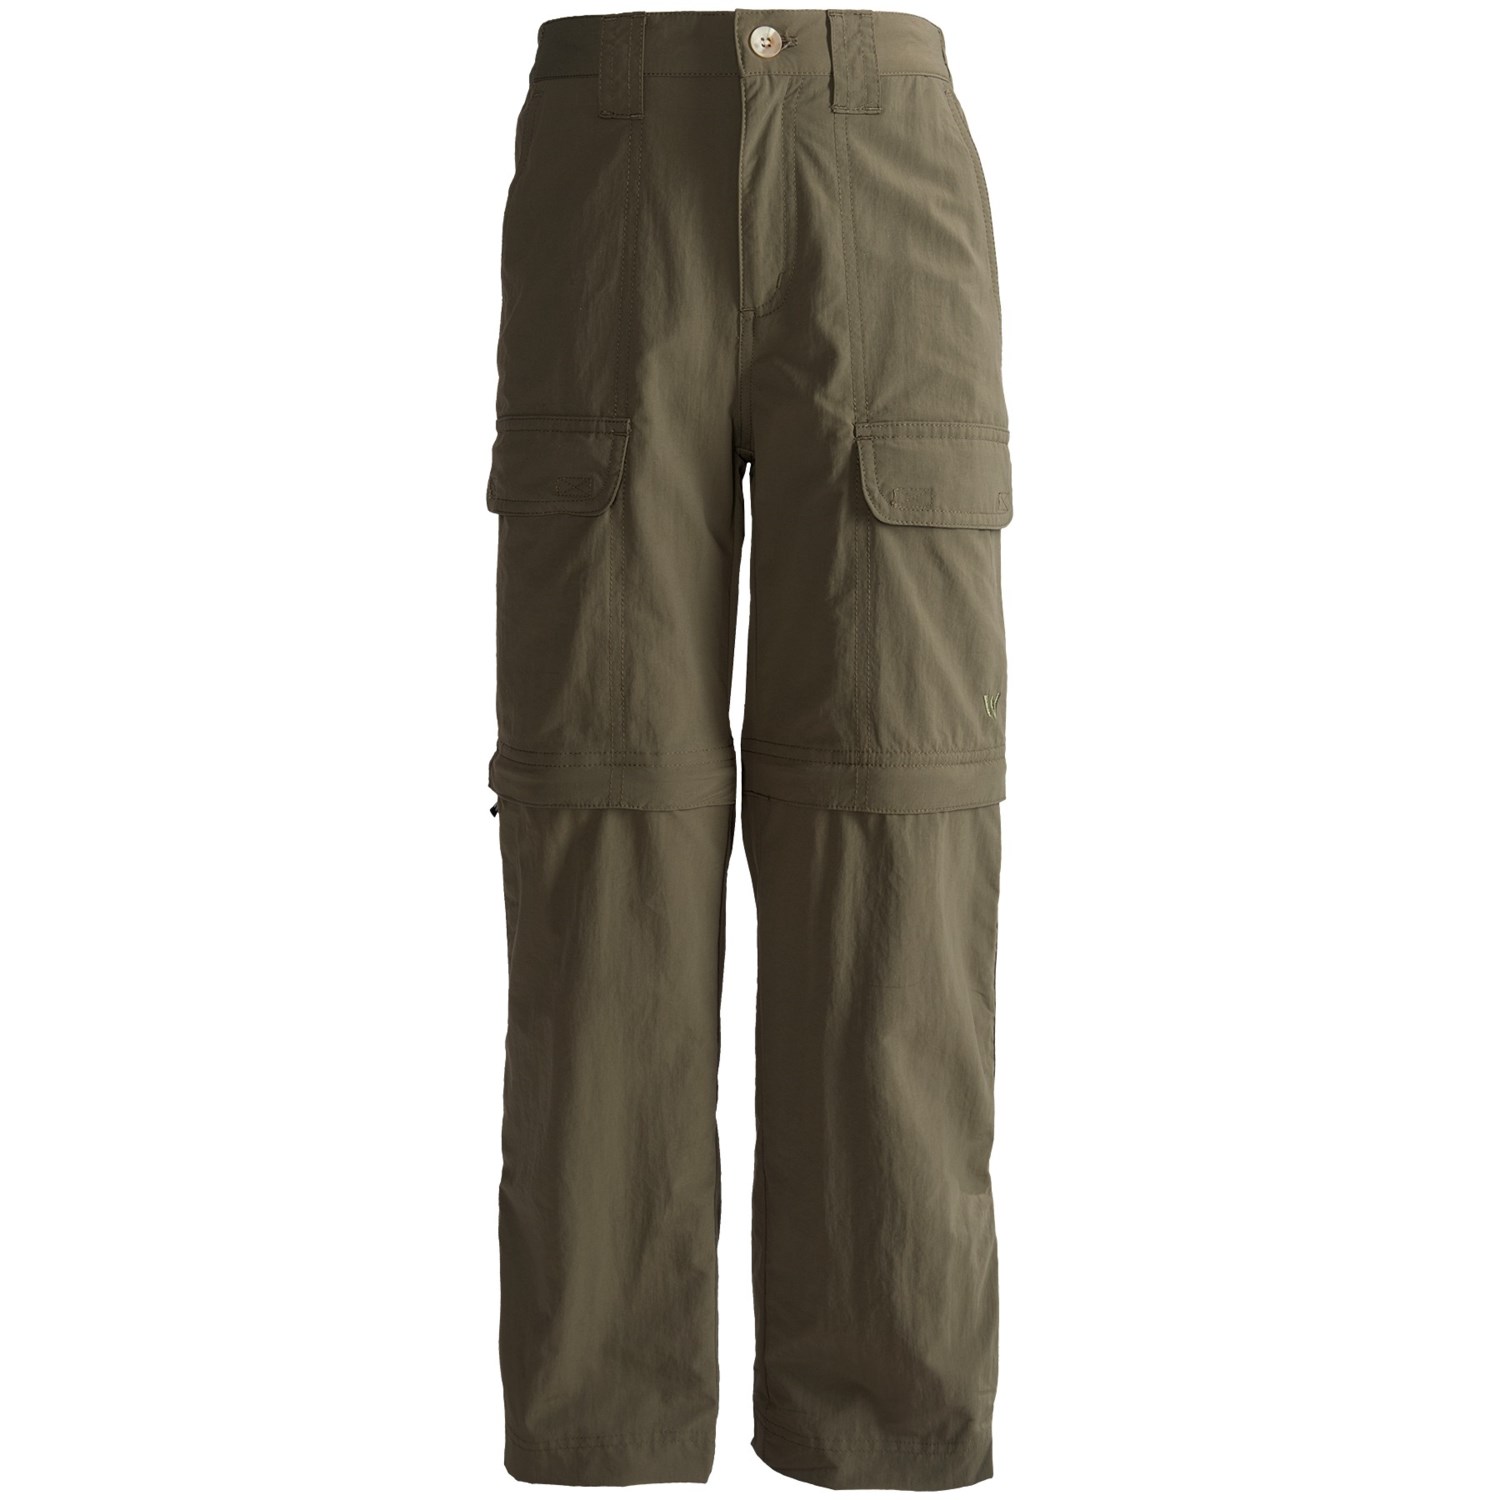 White Sierra Trail Convertible Pants (For Youth) 5377T - Save 35%